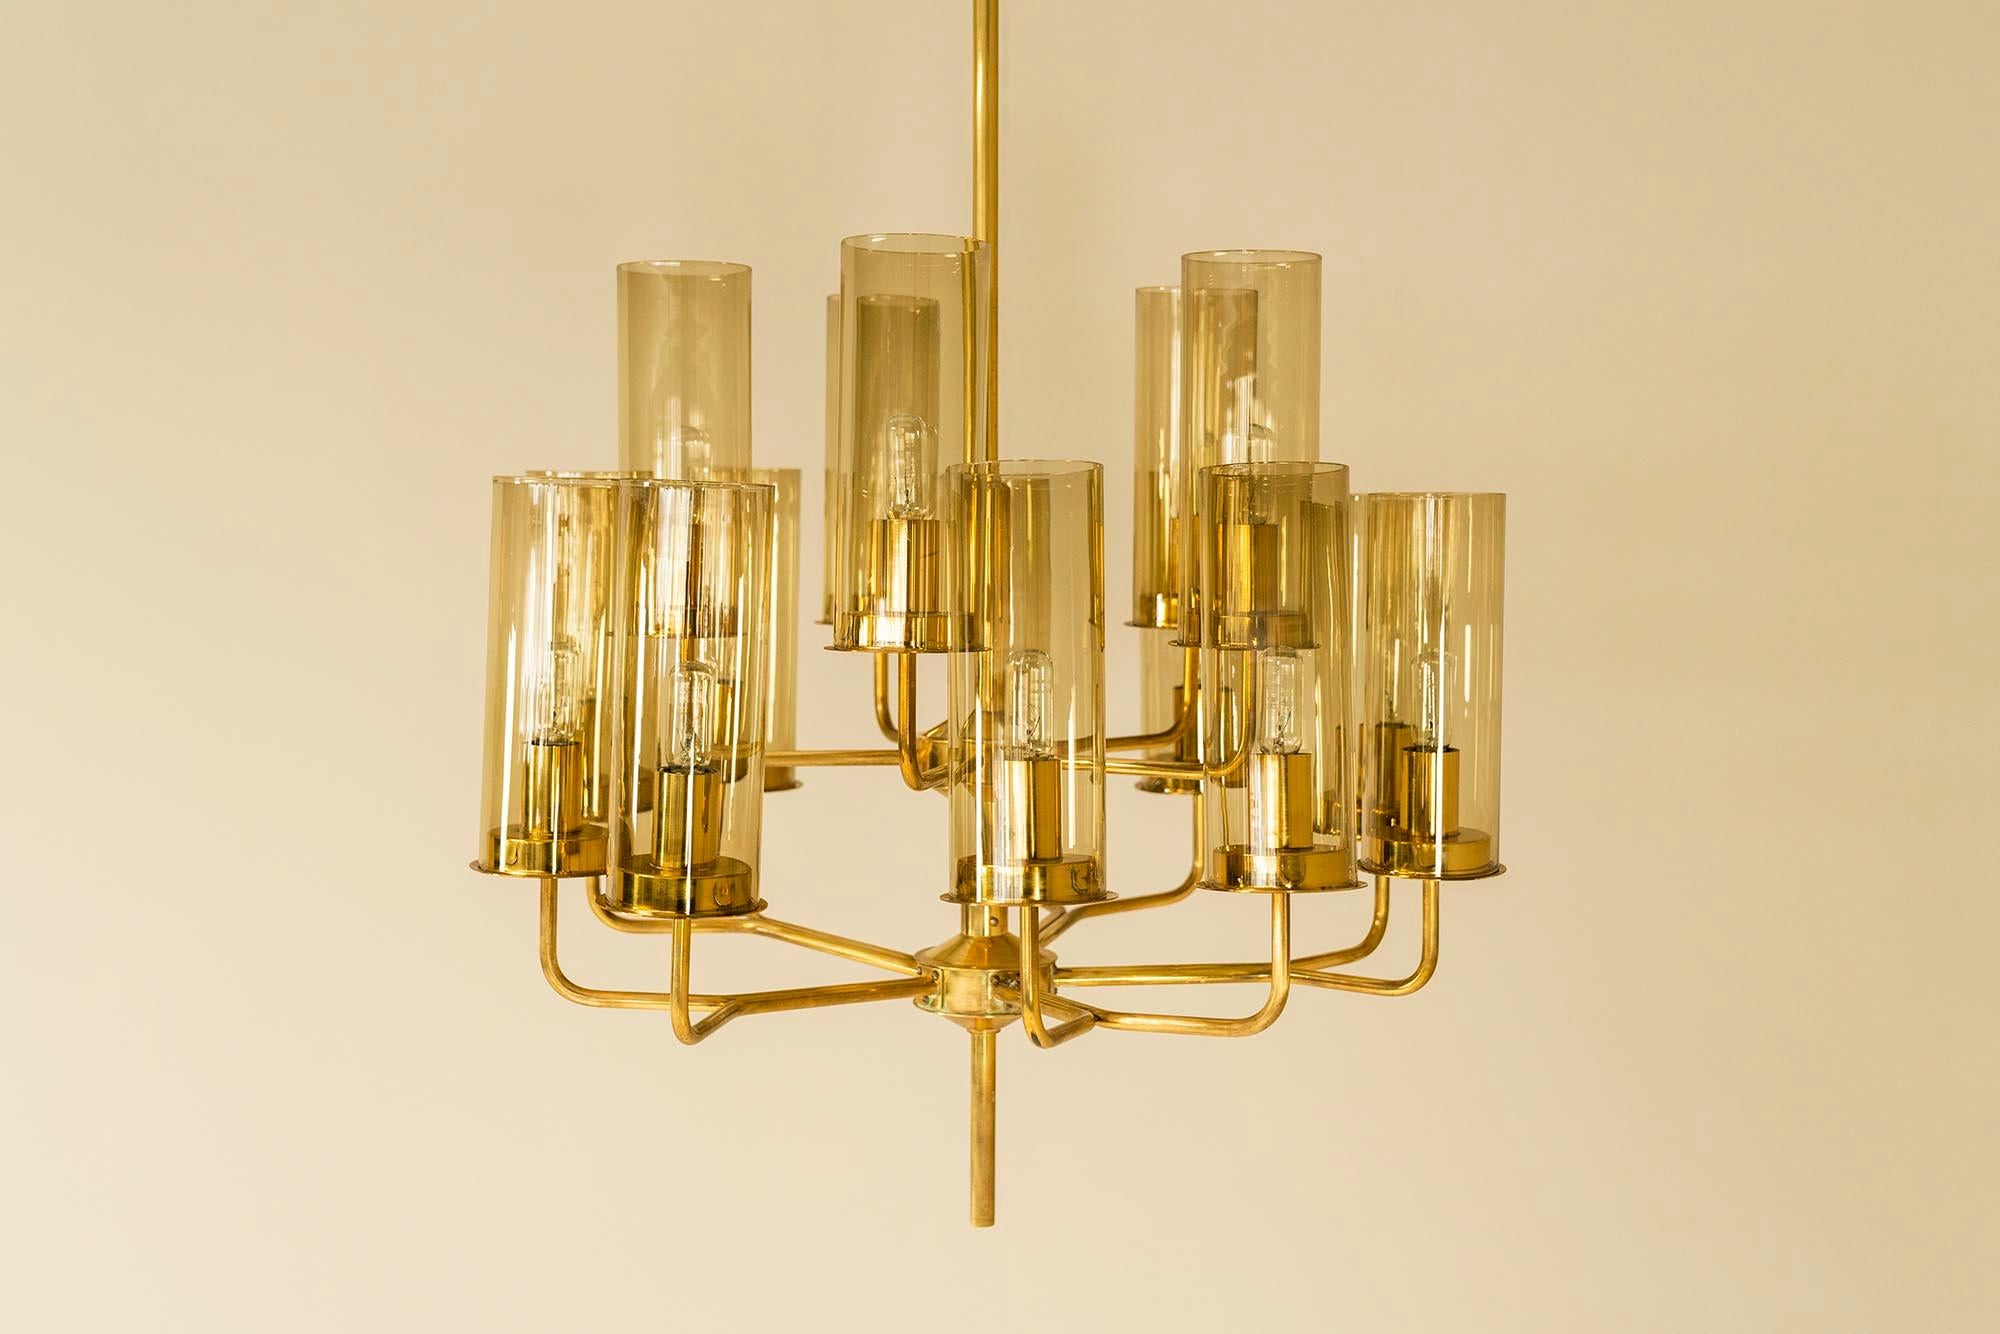 This elegant chandelier was designed in the 1960s by the Swedish interior and furniture designer Hans Agne Jakobsson. His philosophy was to create a soft glowing light that should absolutely not dazzle. In this beautiful design, which consists of